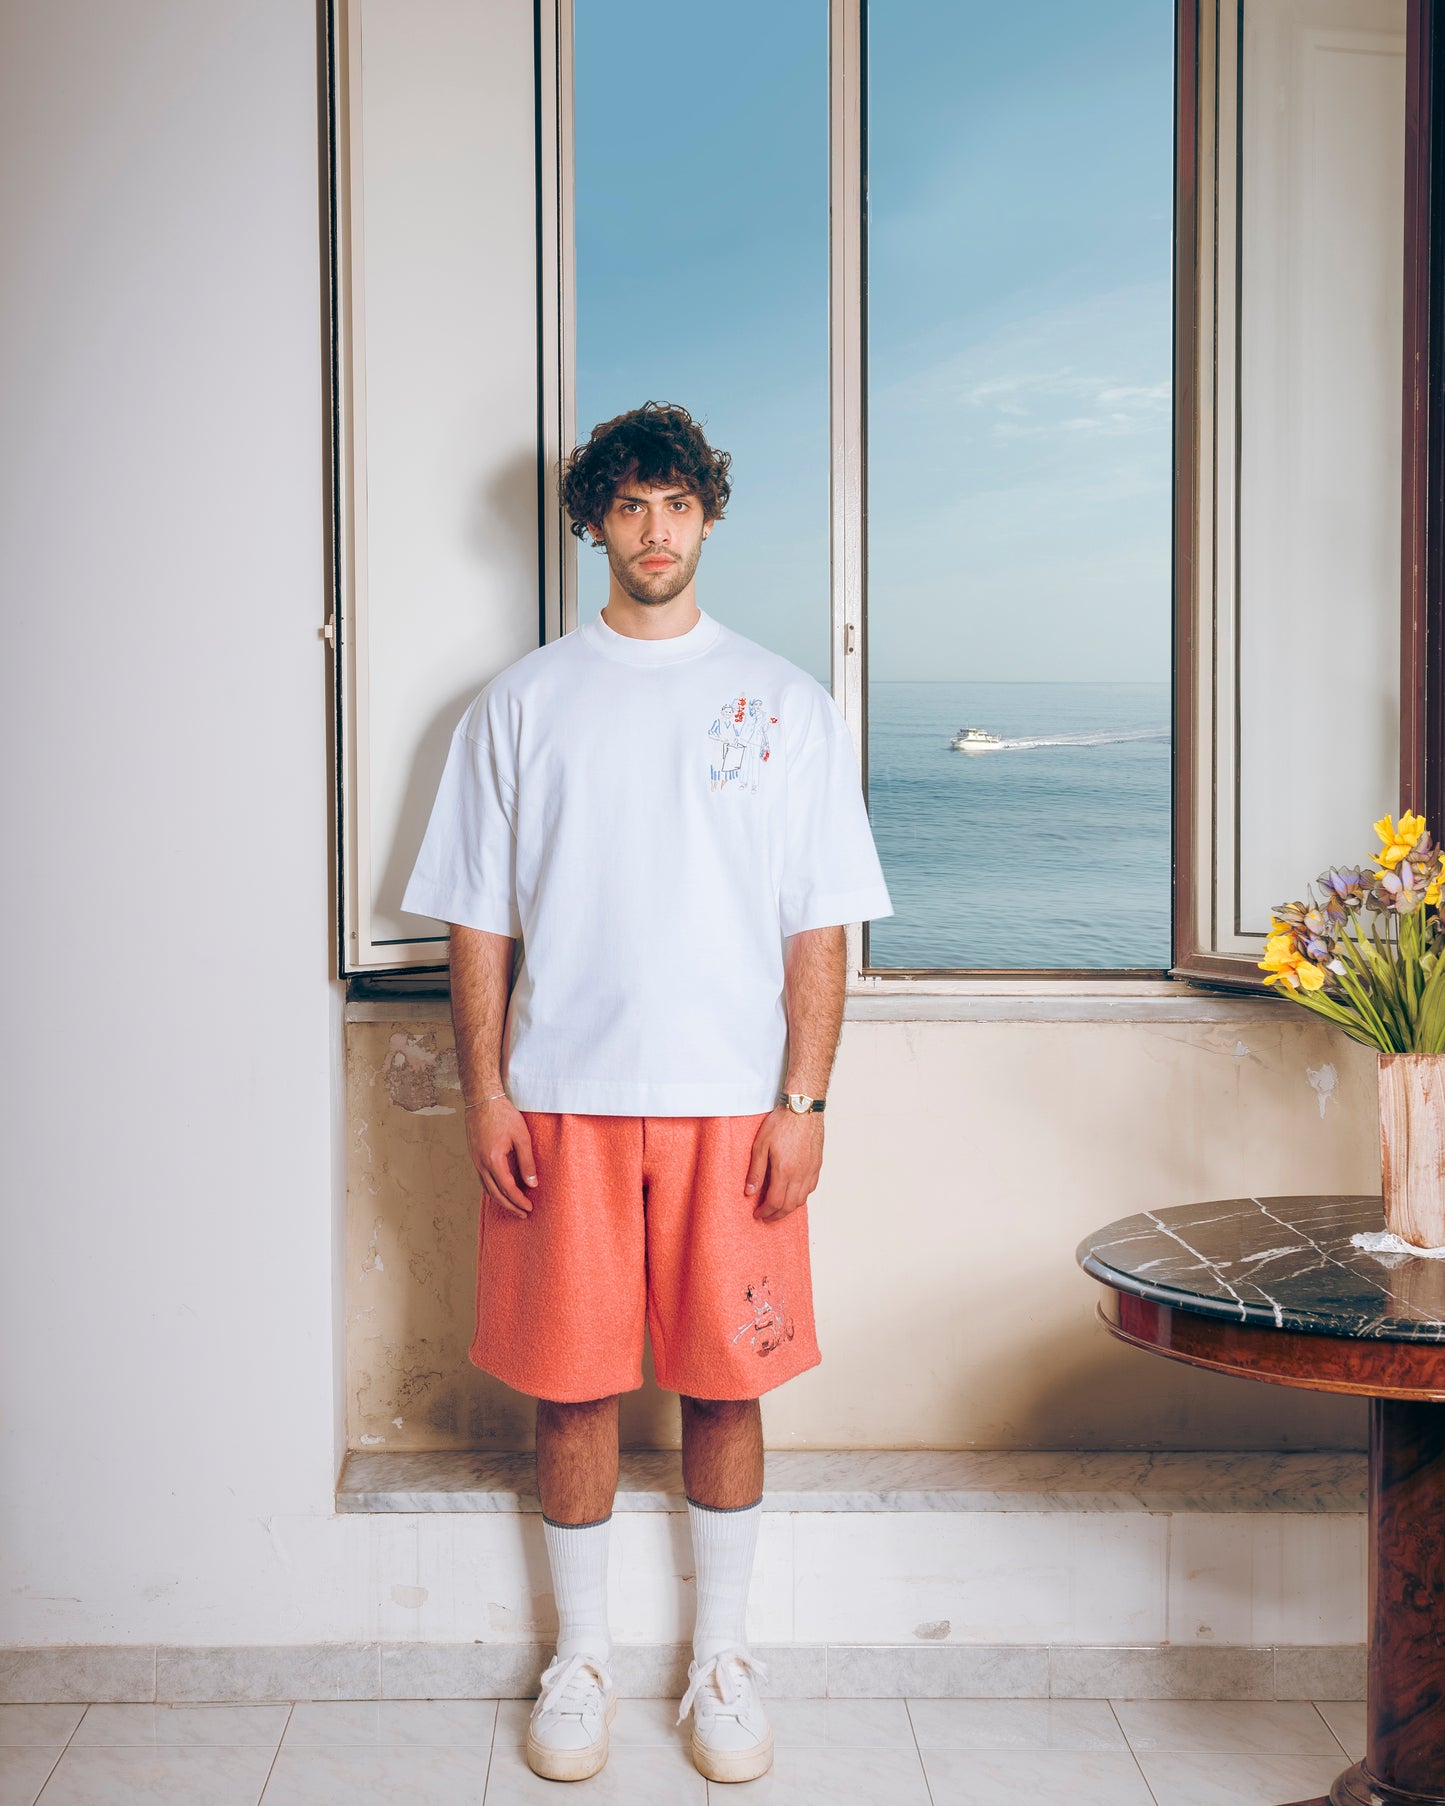 EMBROIDERED HEAVYWEIGHT TEE - FRUIT SELLERS